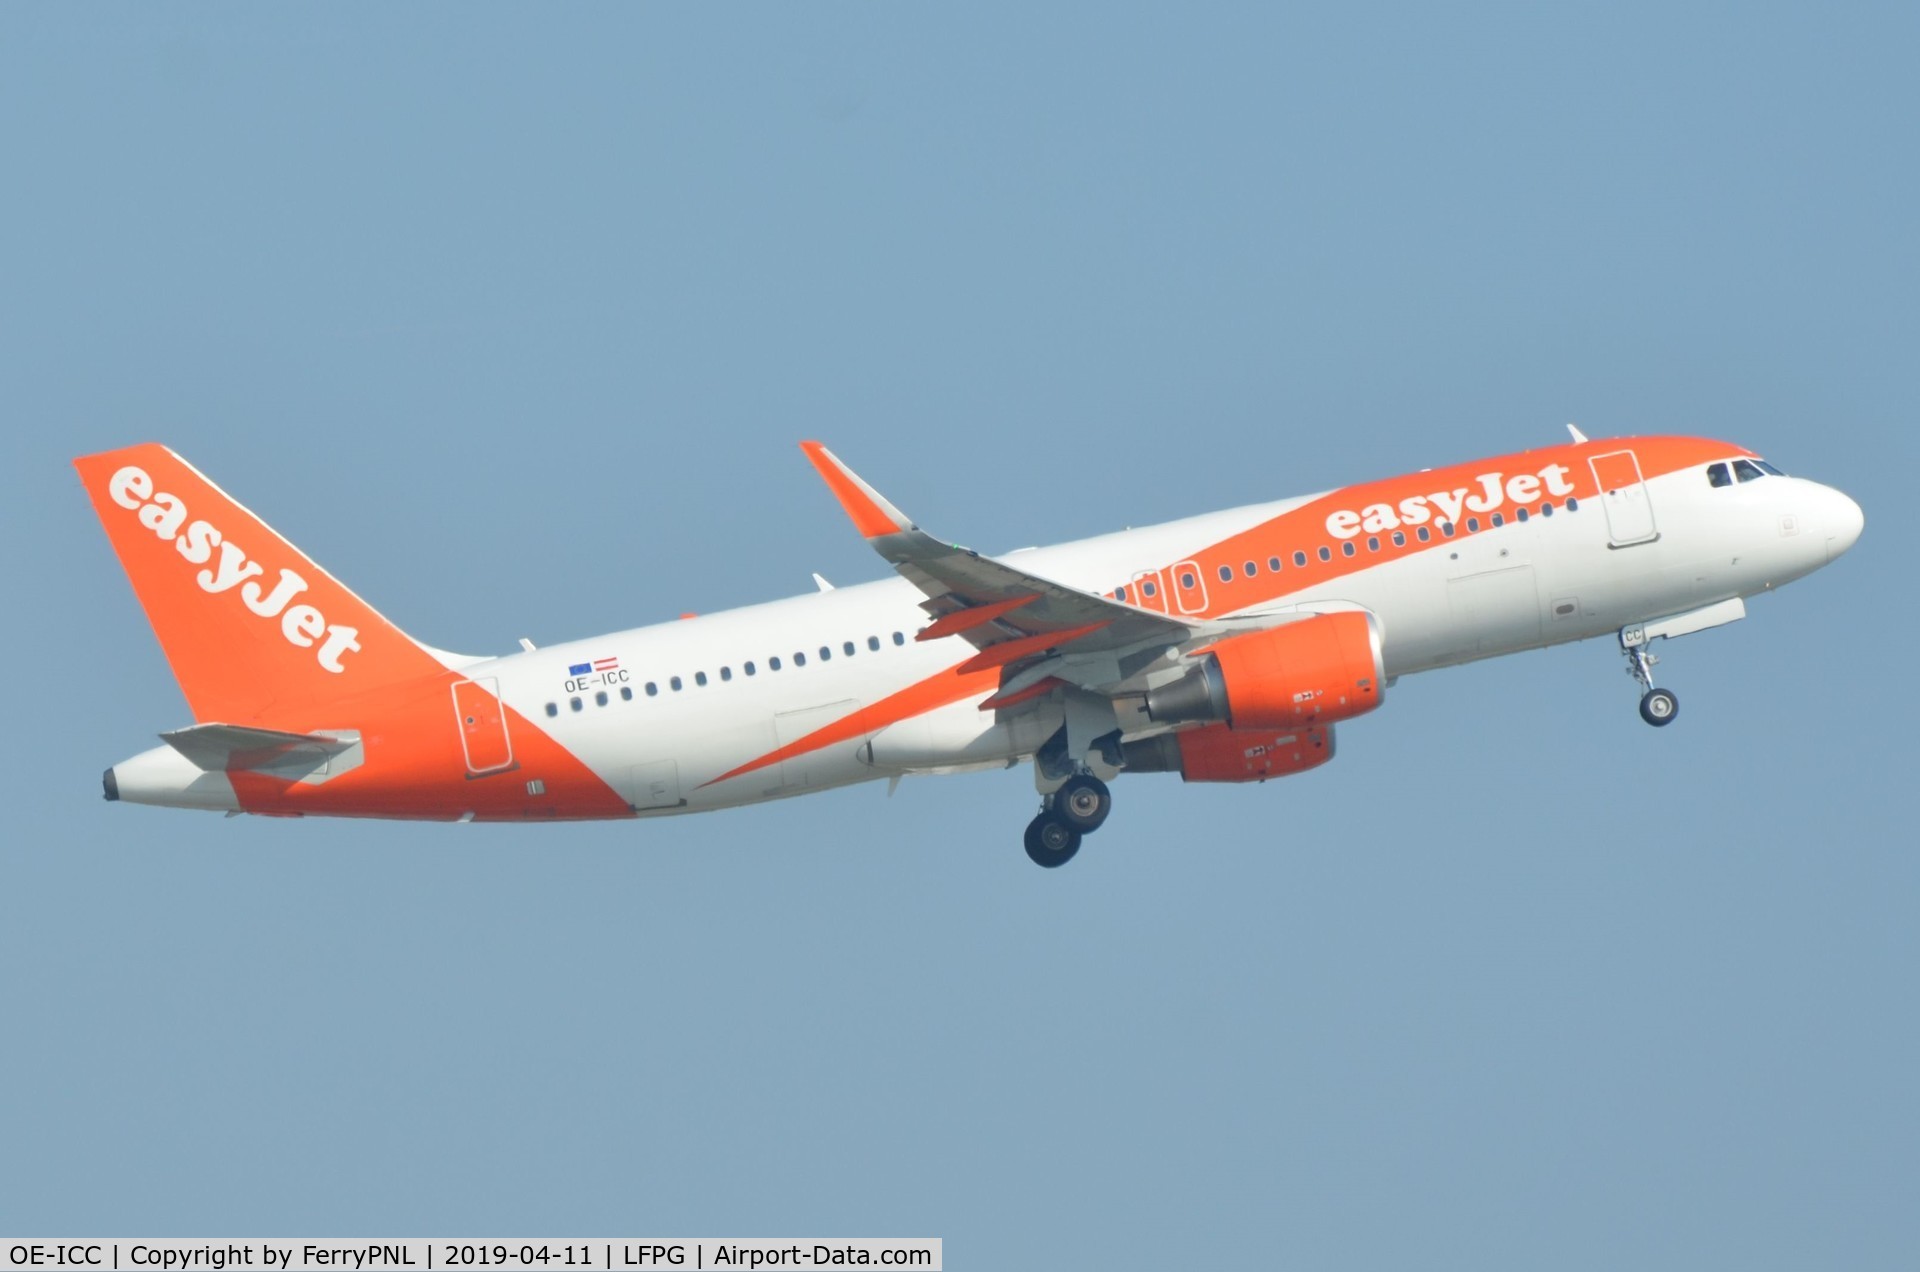 OE-ICC, 2015 Airbus A320-214 C/N 6680, Departure of Easyjet A320